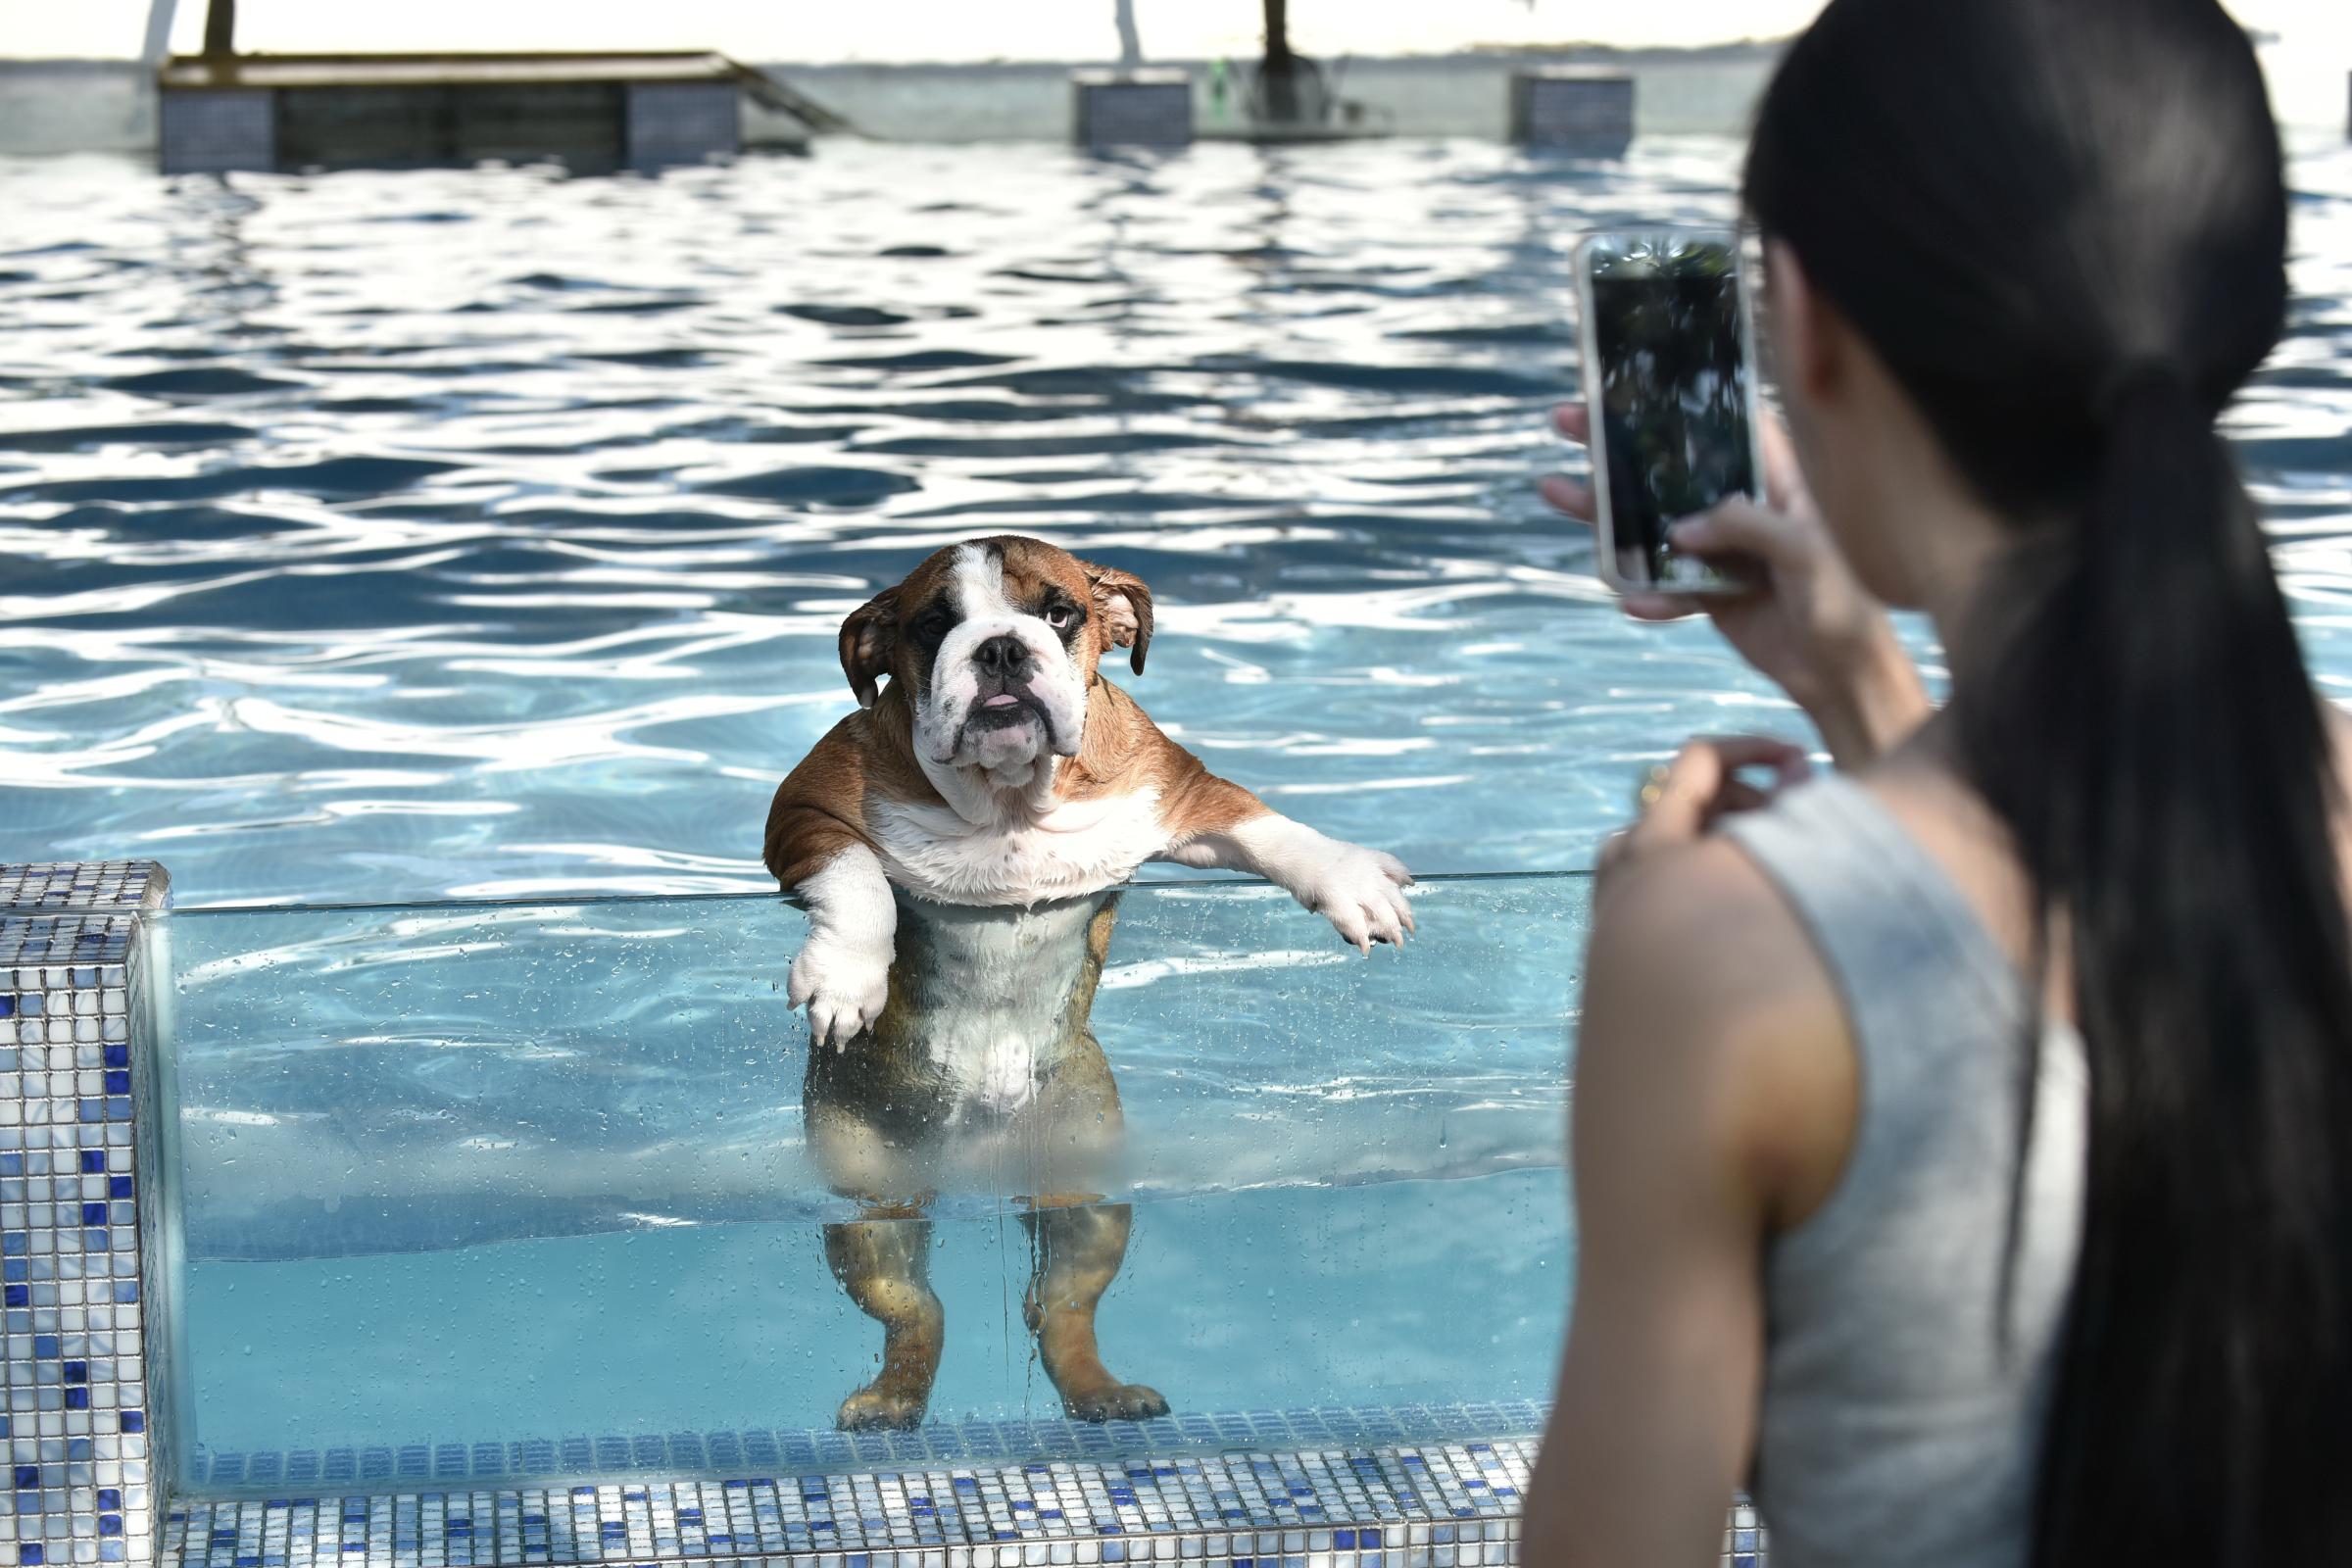 An owner takes a picture of her dog as it climbs up on a glass panel while swimming at a pool for dogs in Chengdu, China, on Aug. 16, 2016.